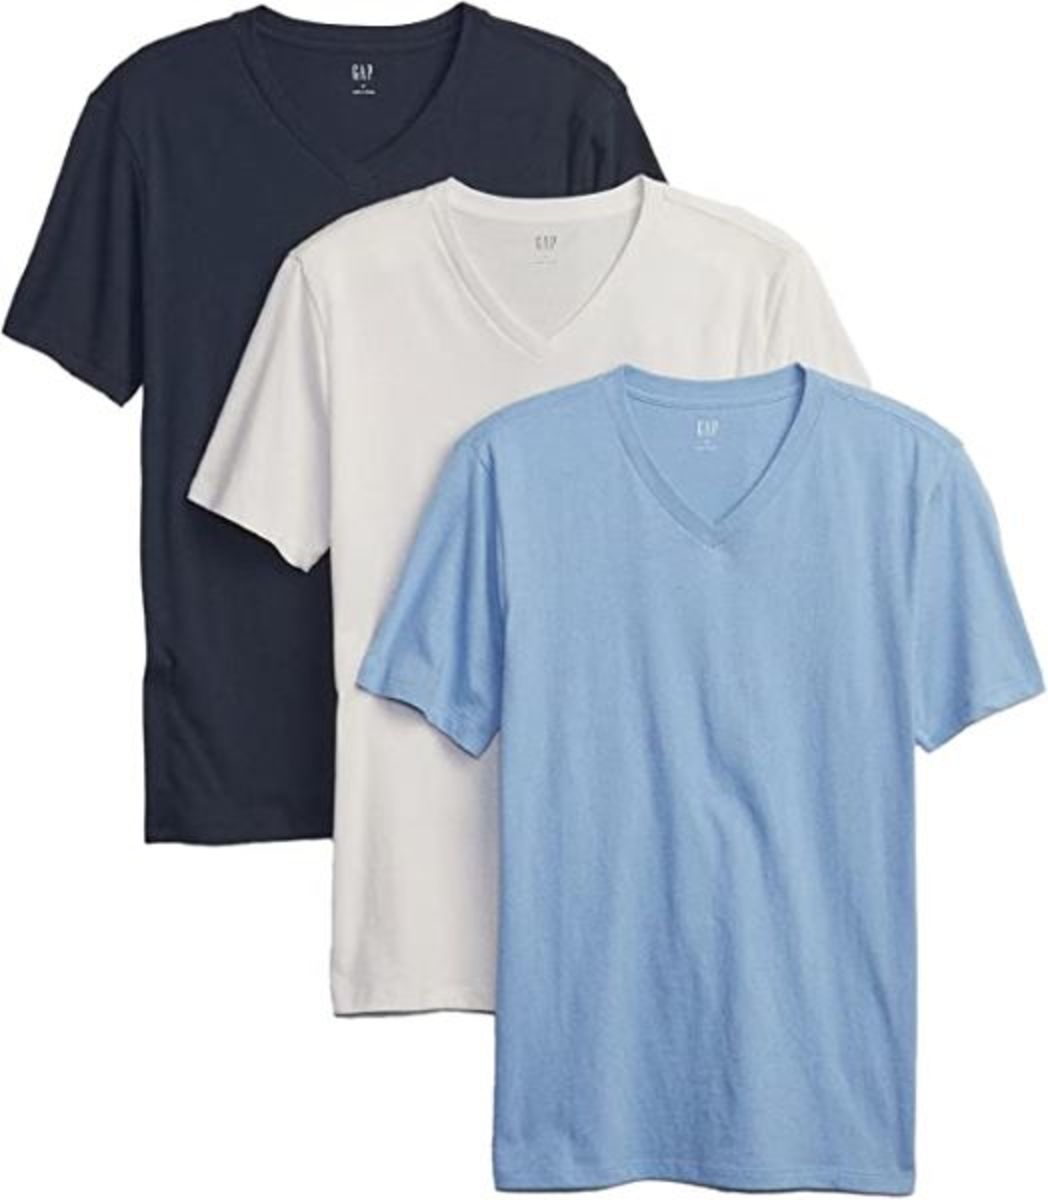 Gap T-shirts Are Up to 60% Off on Amazon This Weekend - Men's Journal